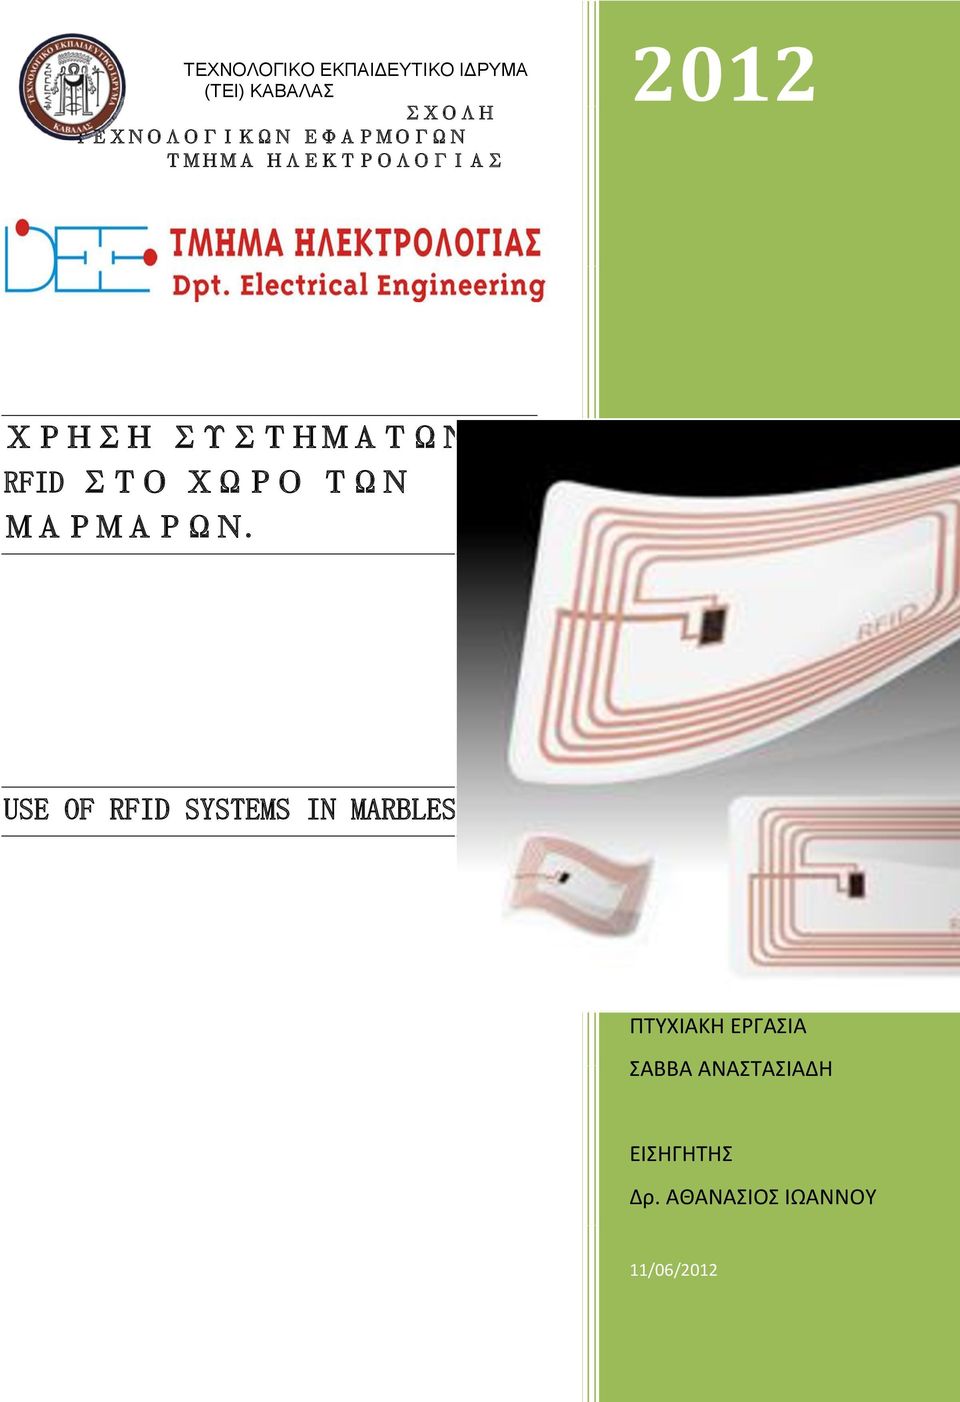 USE OF RFID SYSTEMS IN MARBLES ΠΤΥΧΙΑΚΗ ΕΡΓΑΣΙΑ ΣΑΒΒΑ ΠΤΥΧΙΑΚΗ ΑΝΑΣΤΑΣΙΑΔΗ